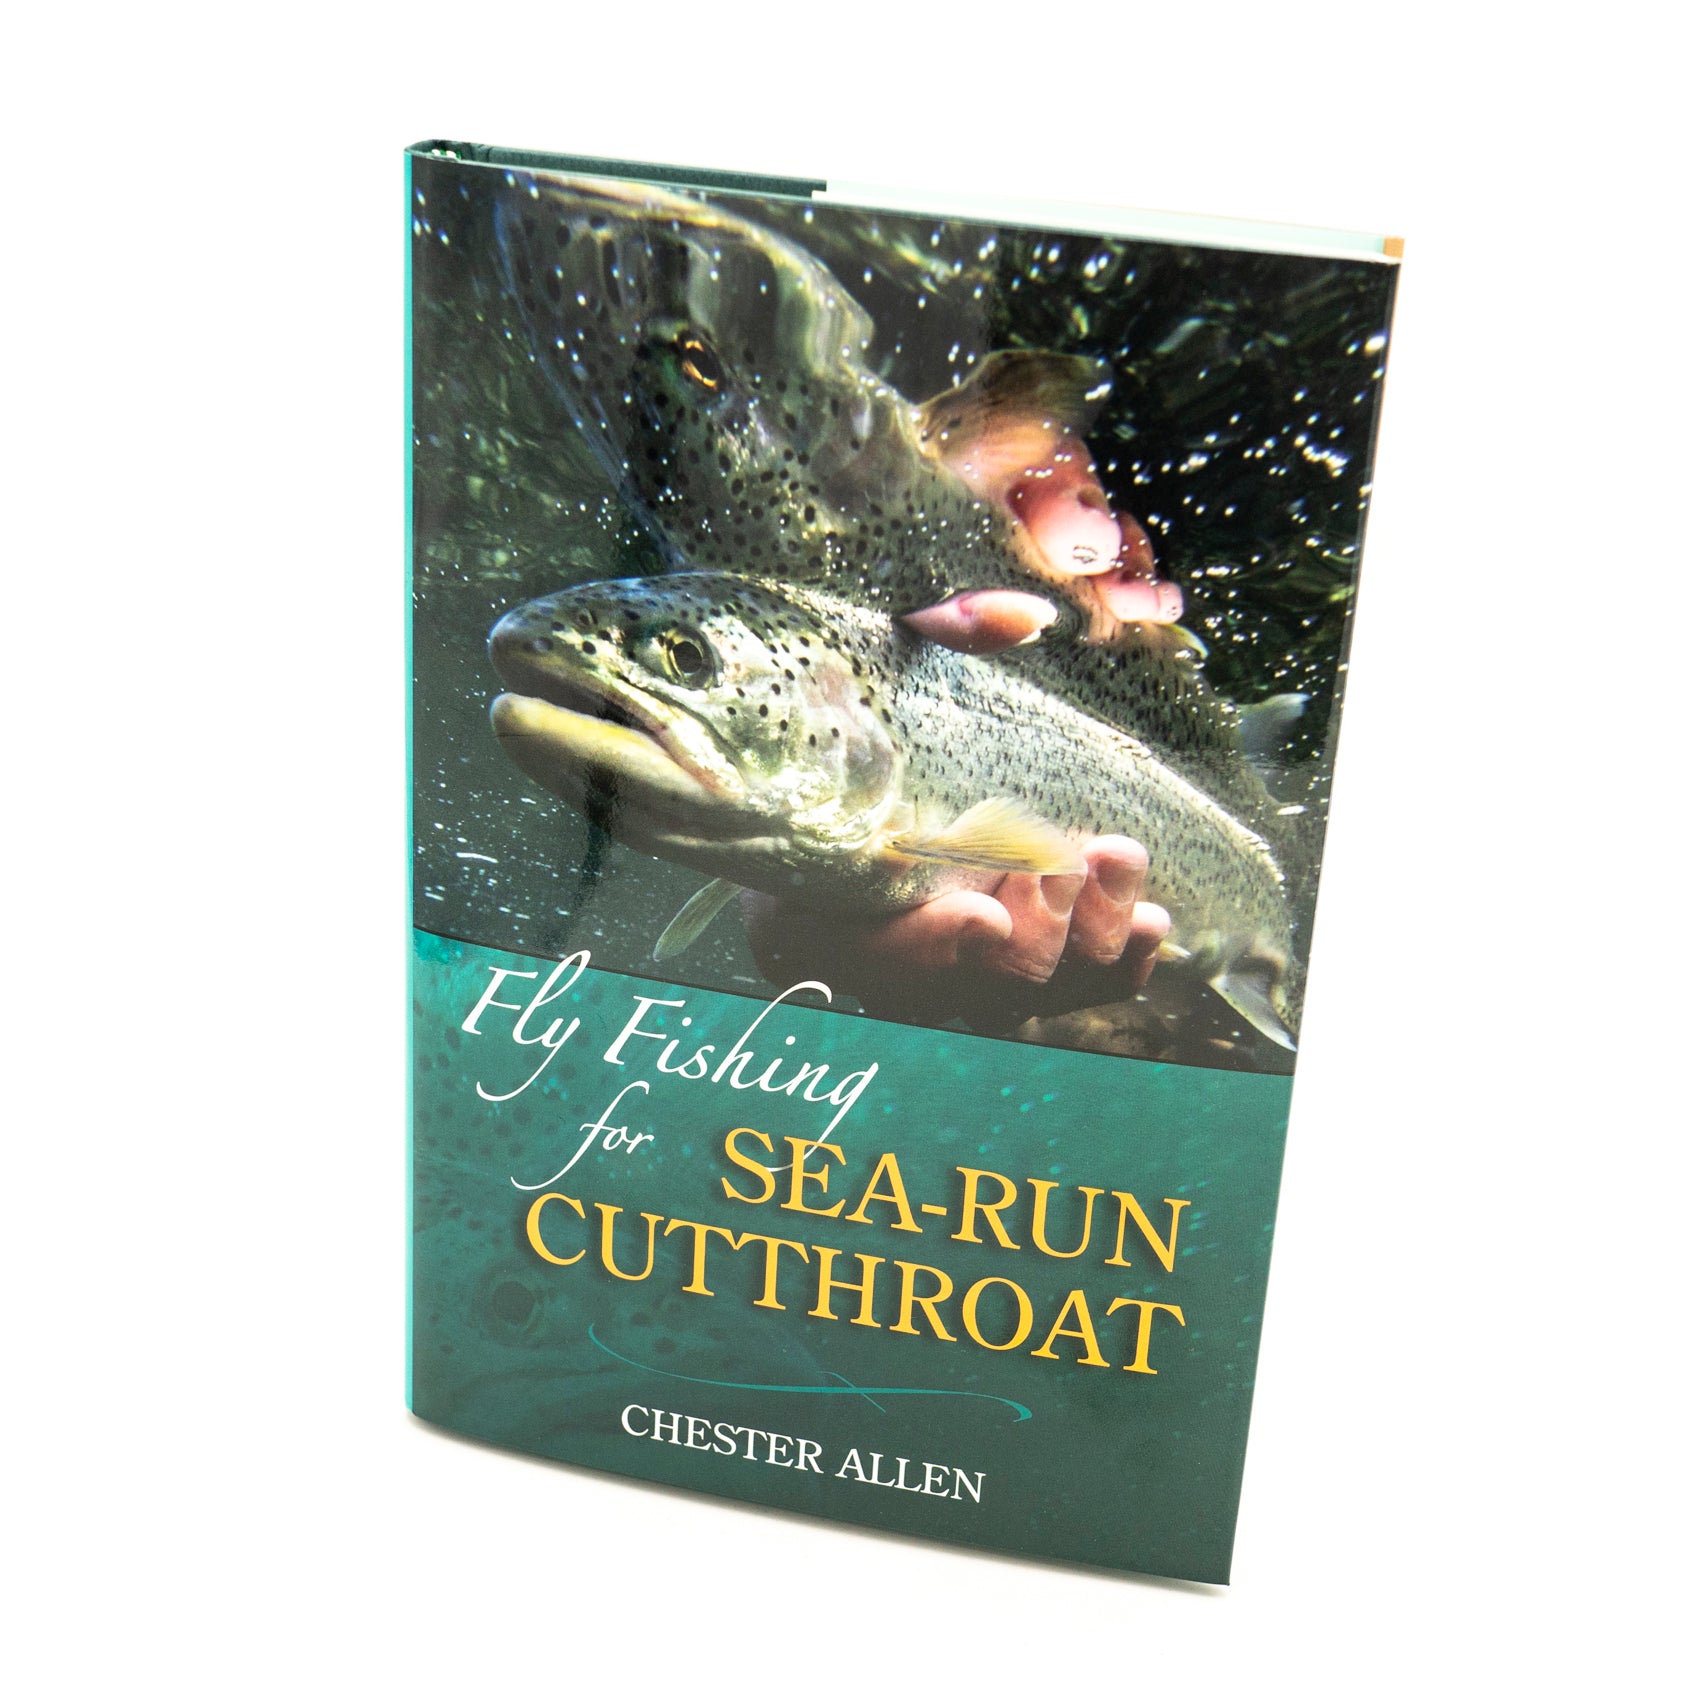 Fly Fishing for Sea-Run Cutthroat | Chester Allen